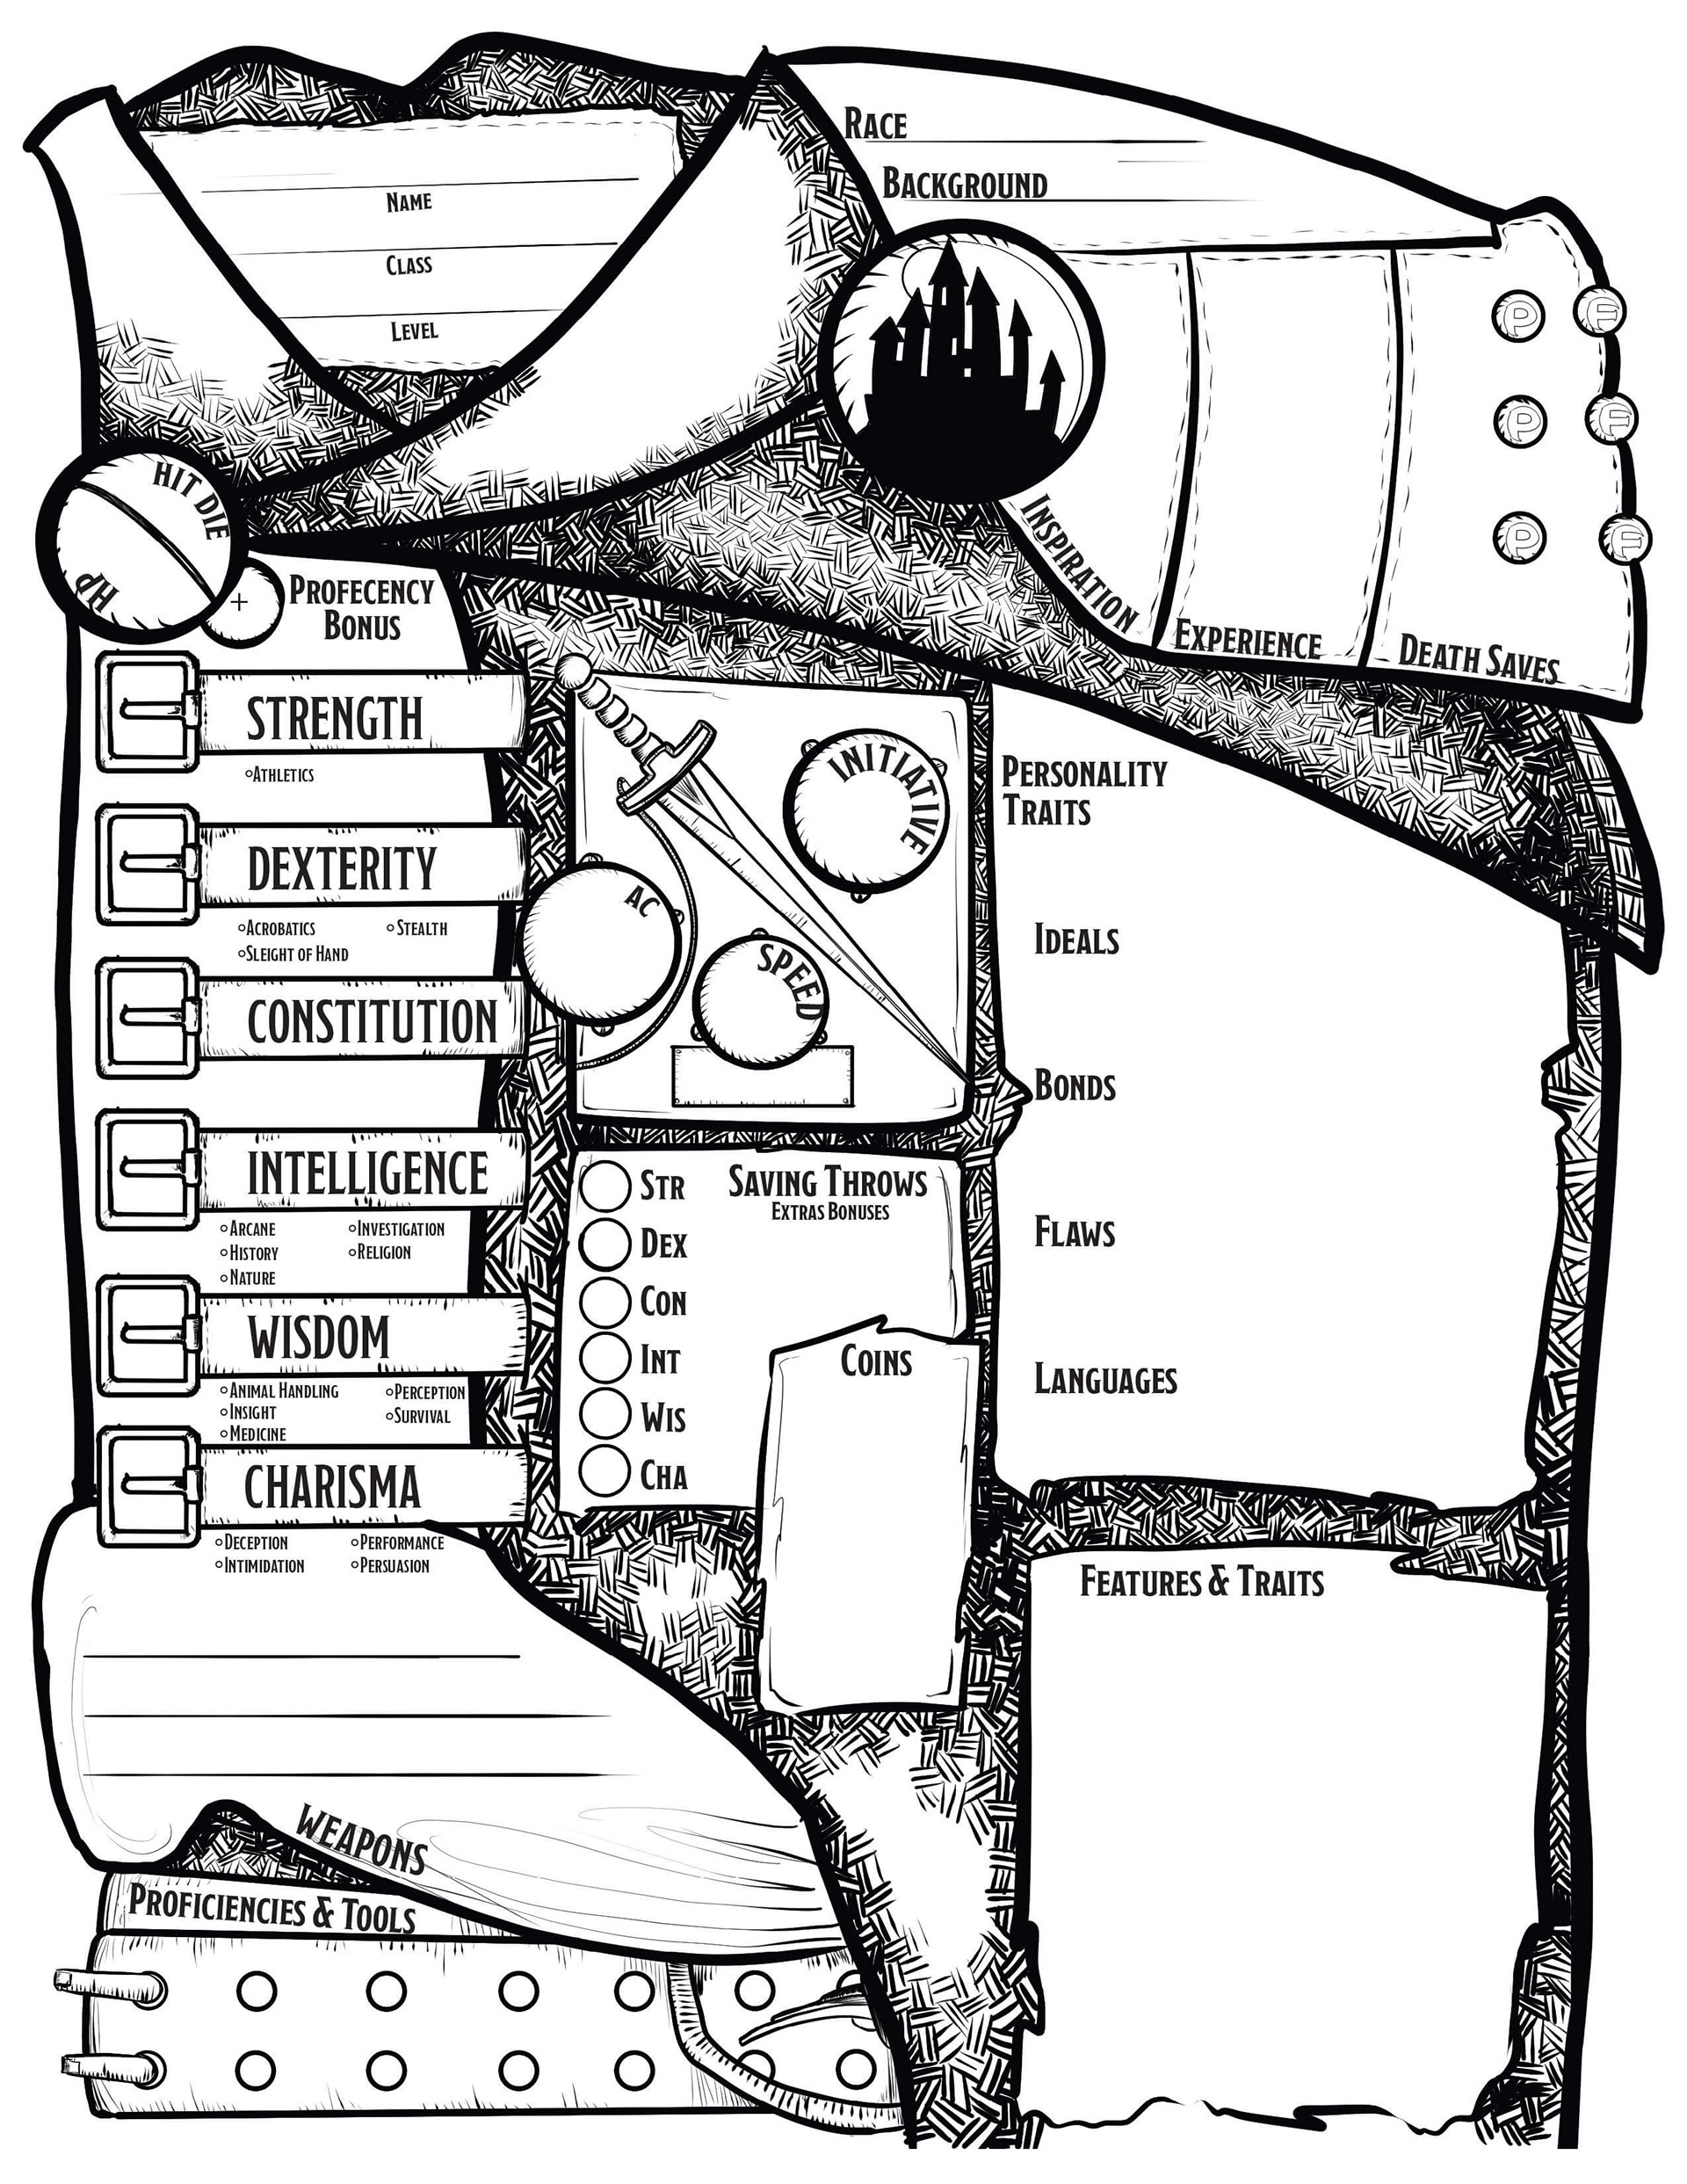 form-fillable-custom-5e-character-sheets-printable-forms-free-online